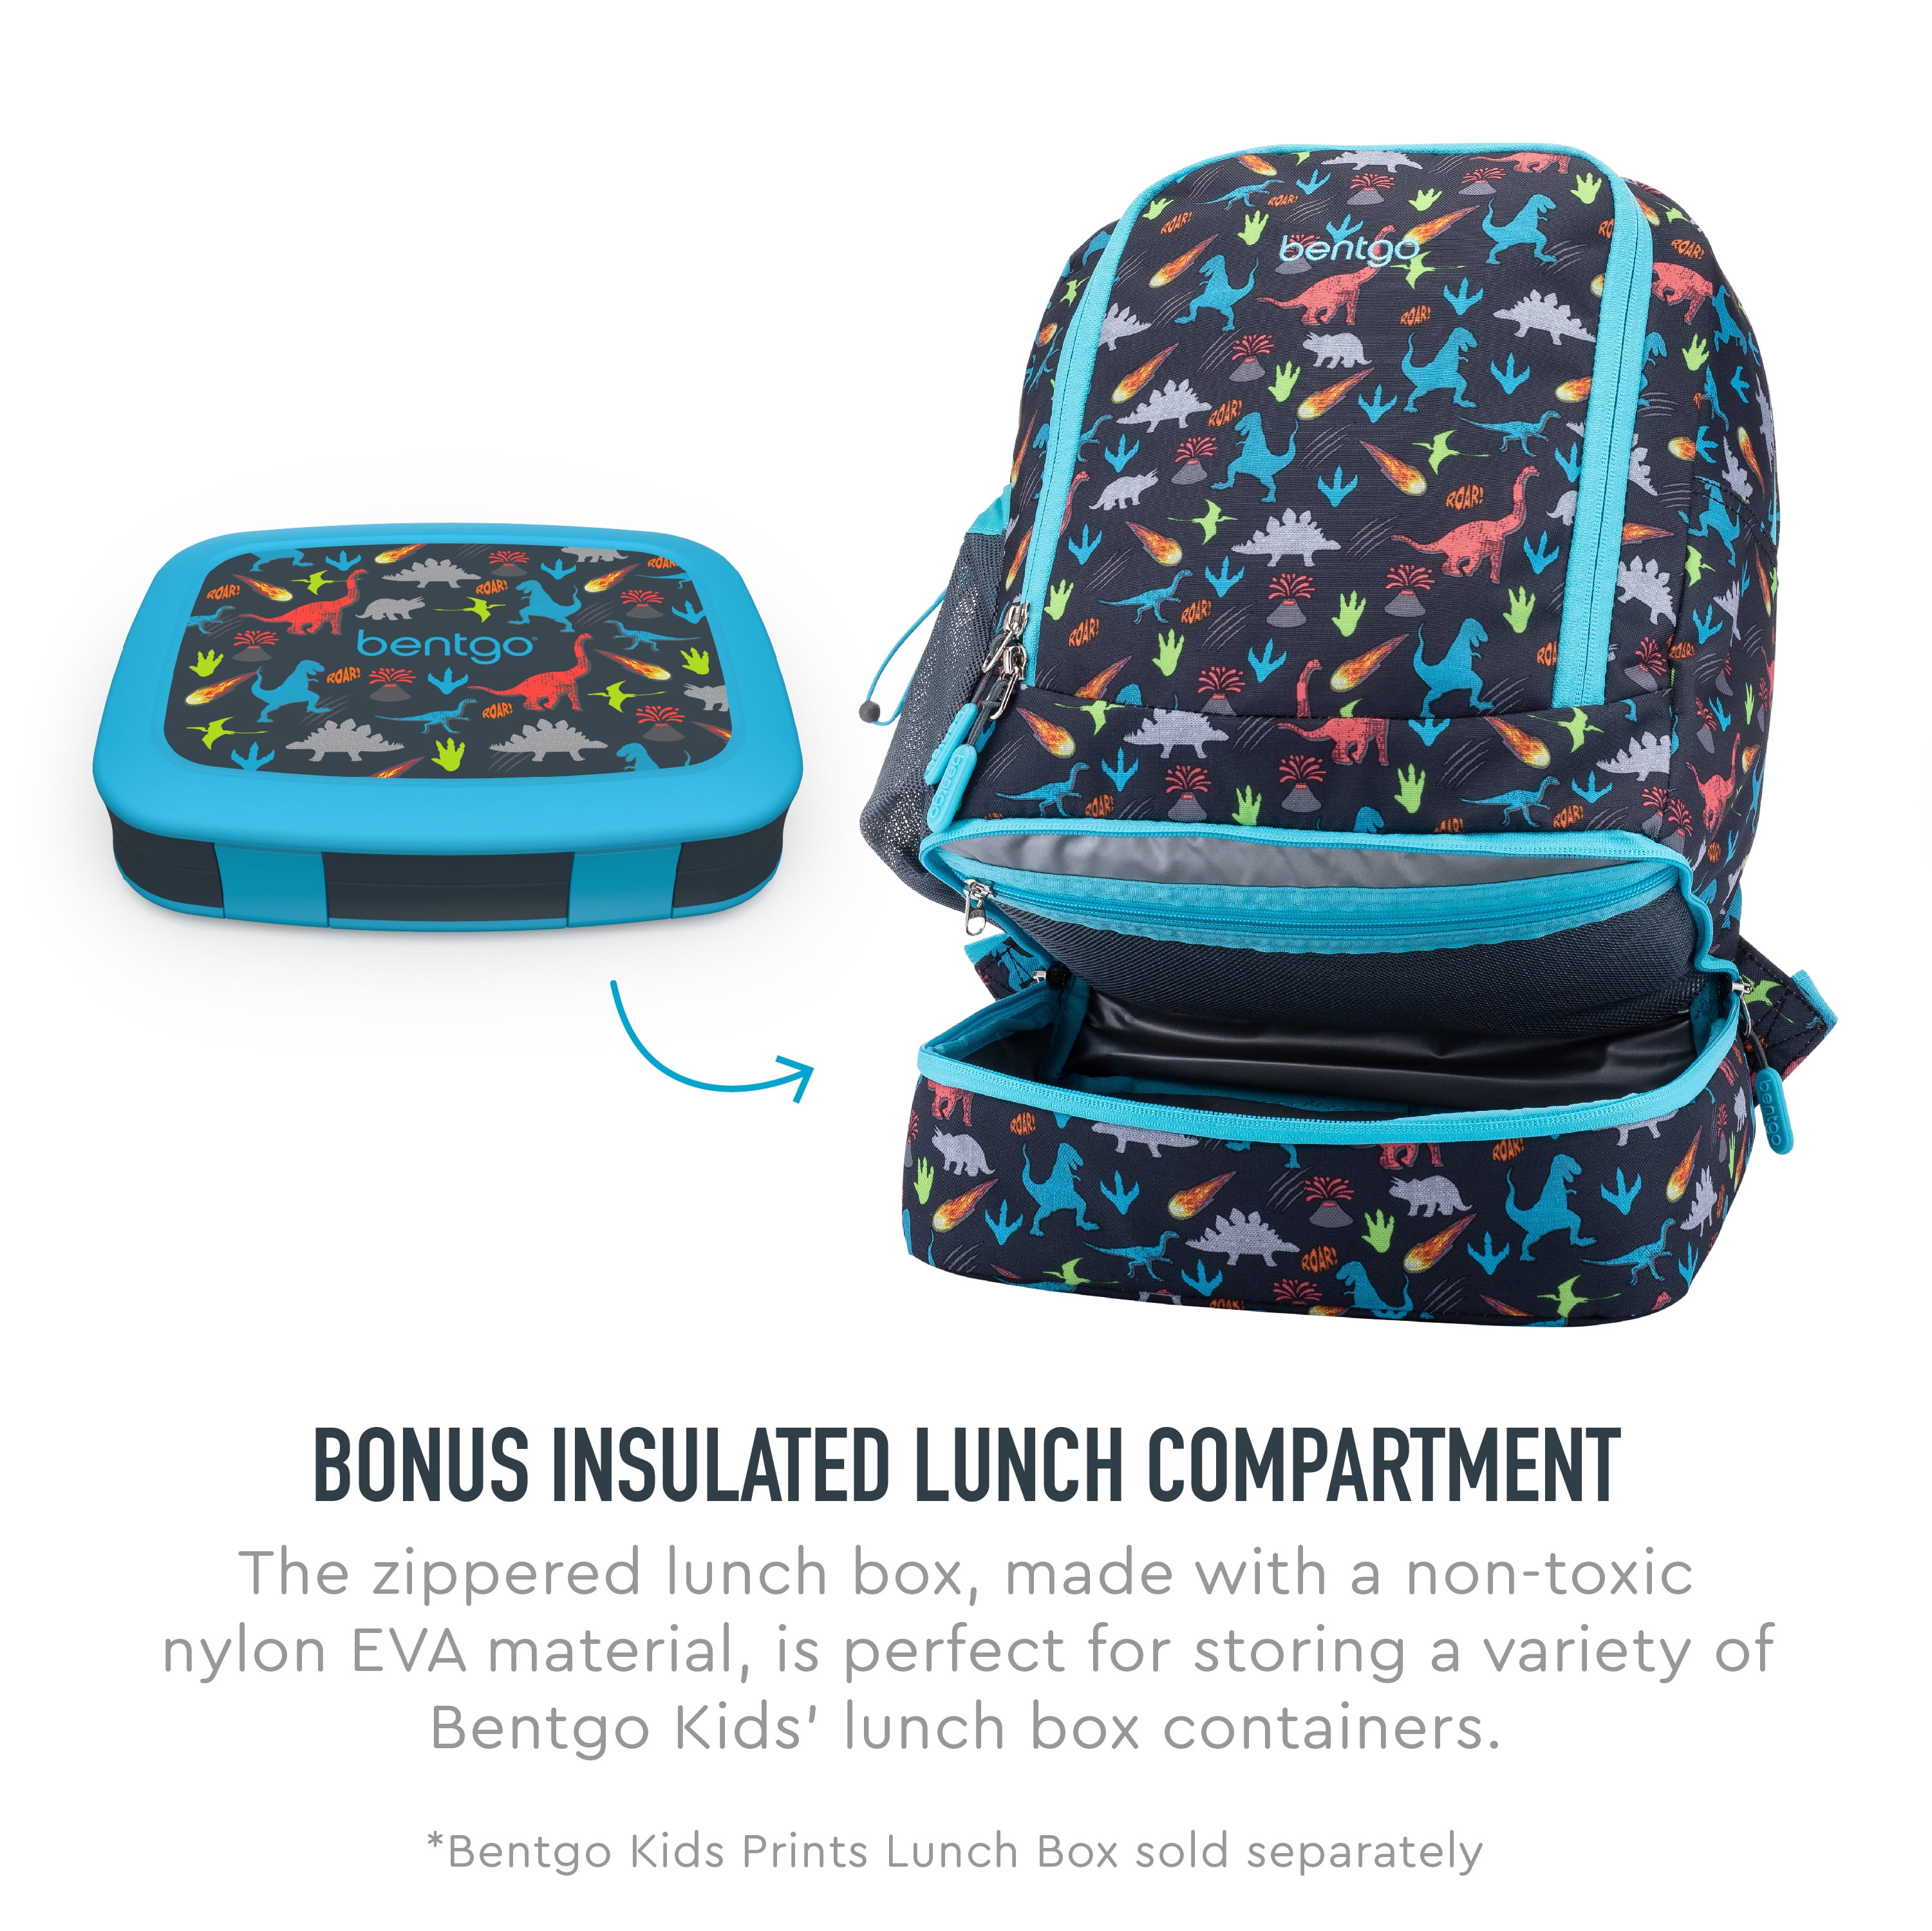  Bentgo® Kids Lightweight 14” Backpack in Unique Prints for  School, Travel, & Daycare - Roomy Interior, Durable & Water-Resistant  Fabric, & Loop for Lunch Bag (Dinosaur)